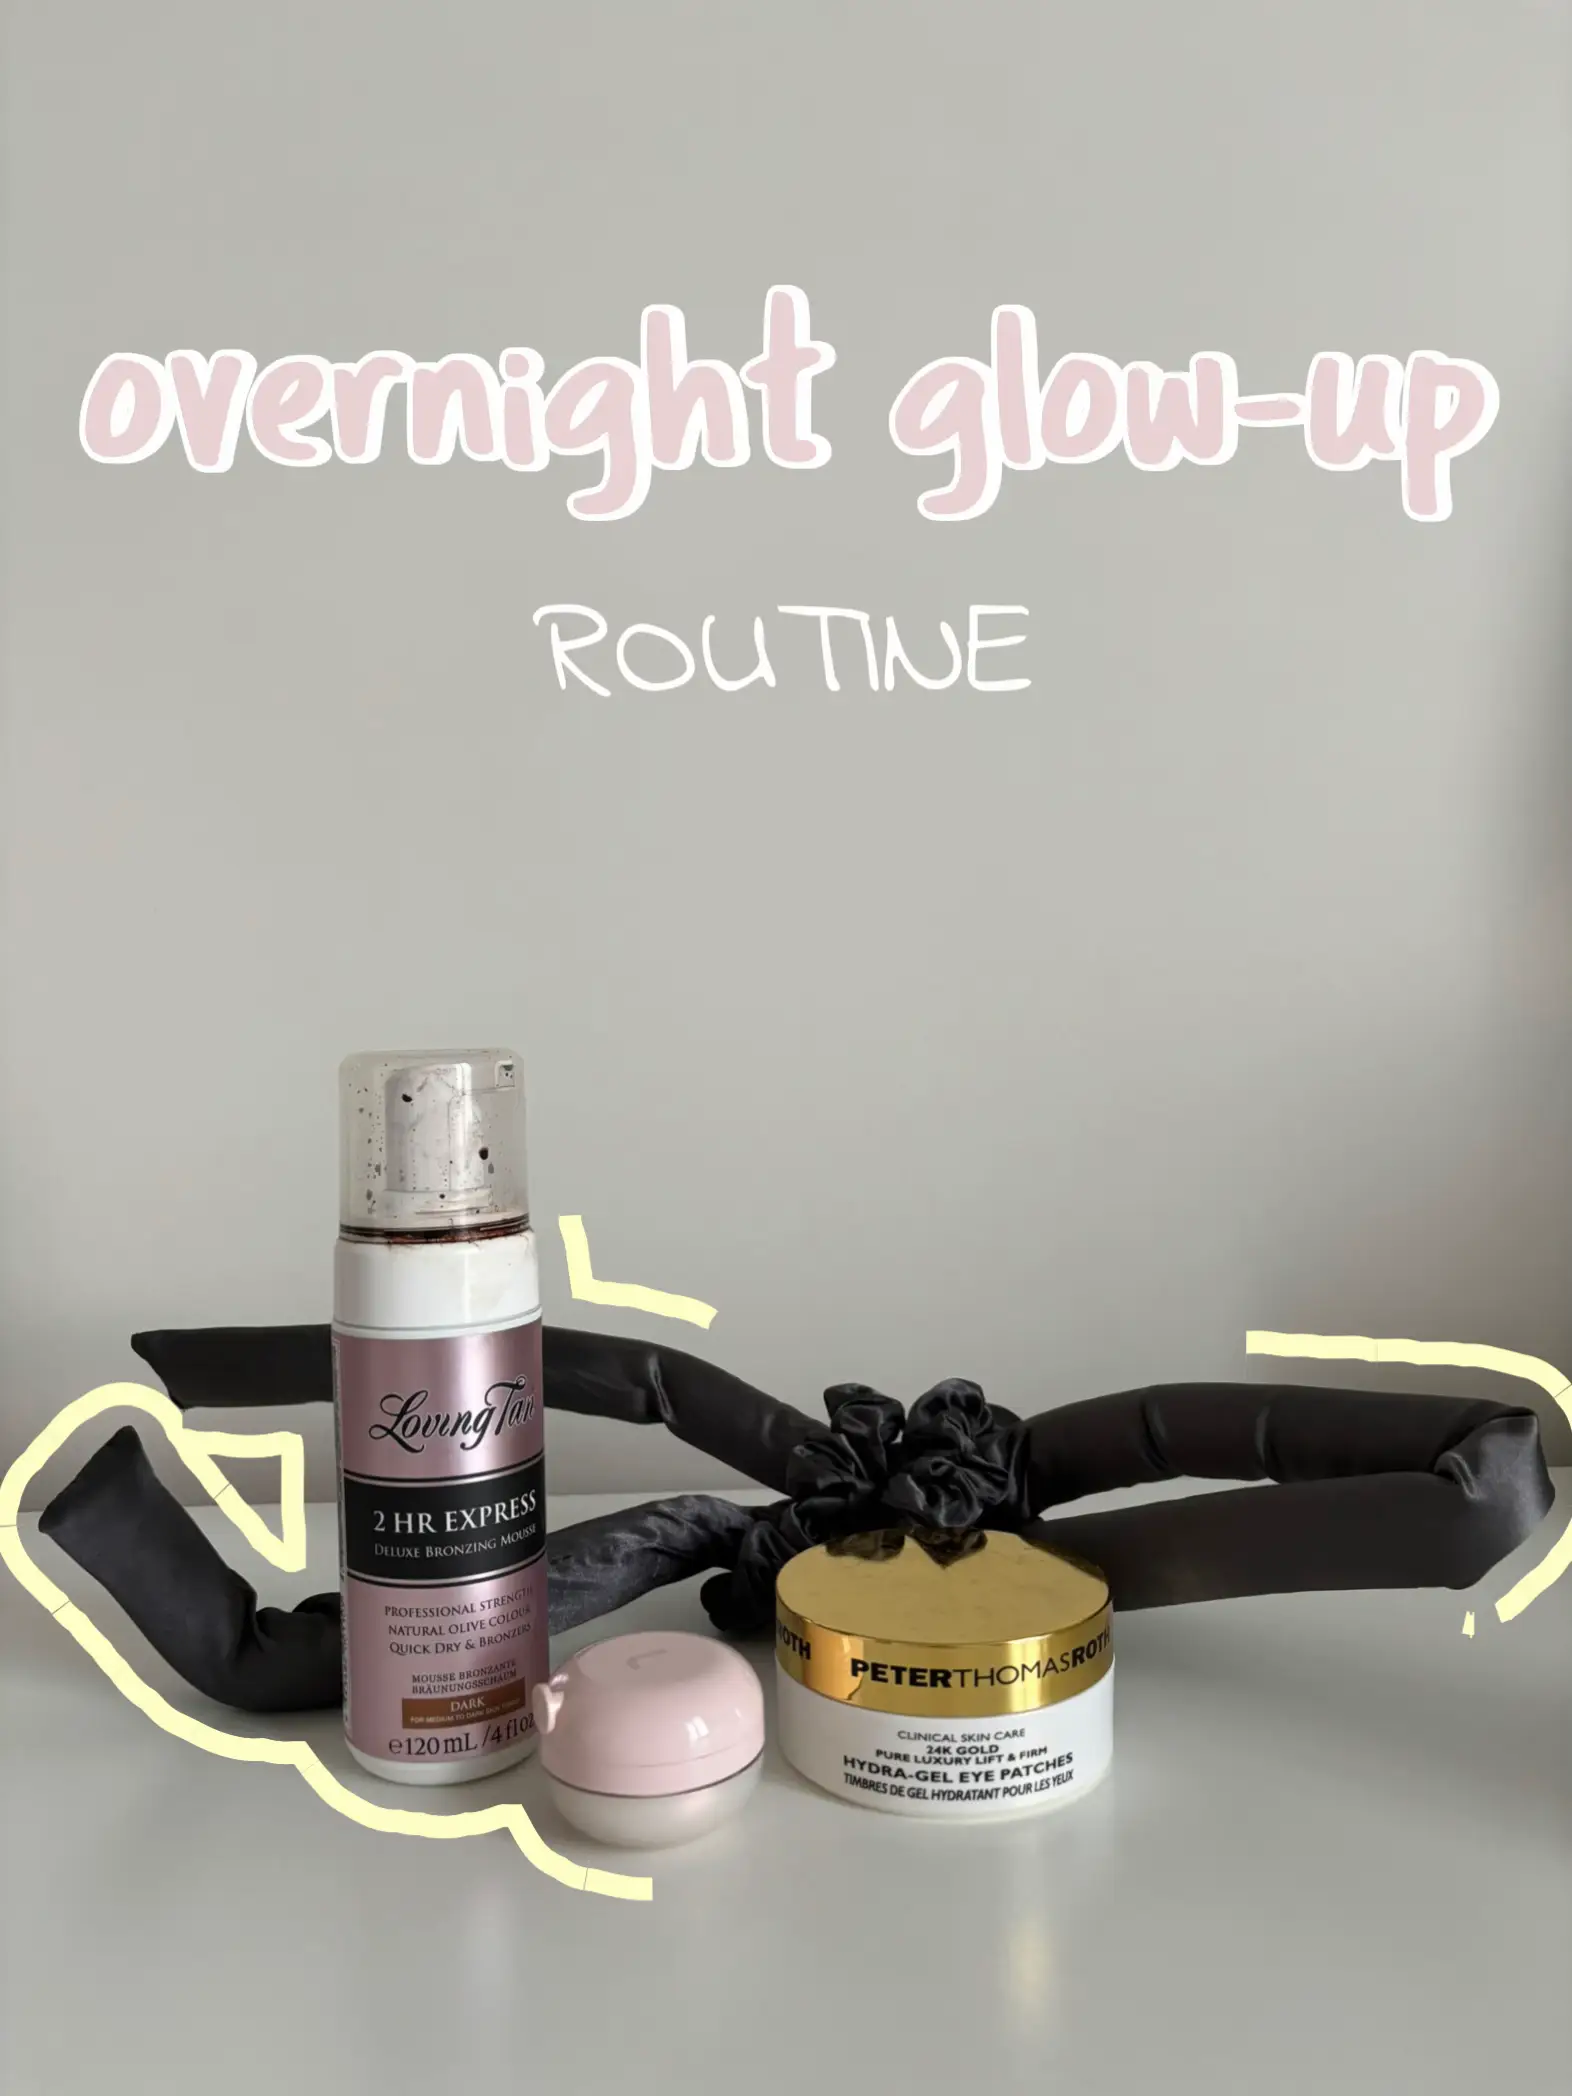 ✨OVERNIGHT GLOW-UP ROUTINE ✨  Gallery posted by sarahfenste